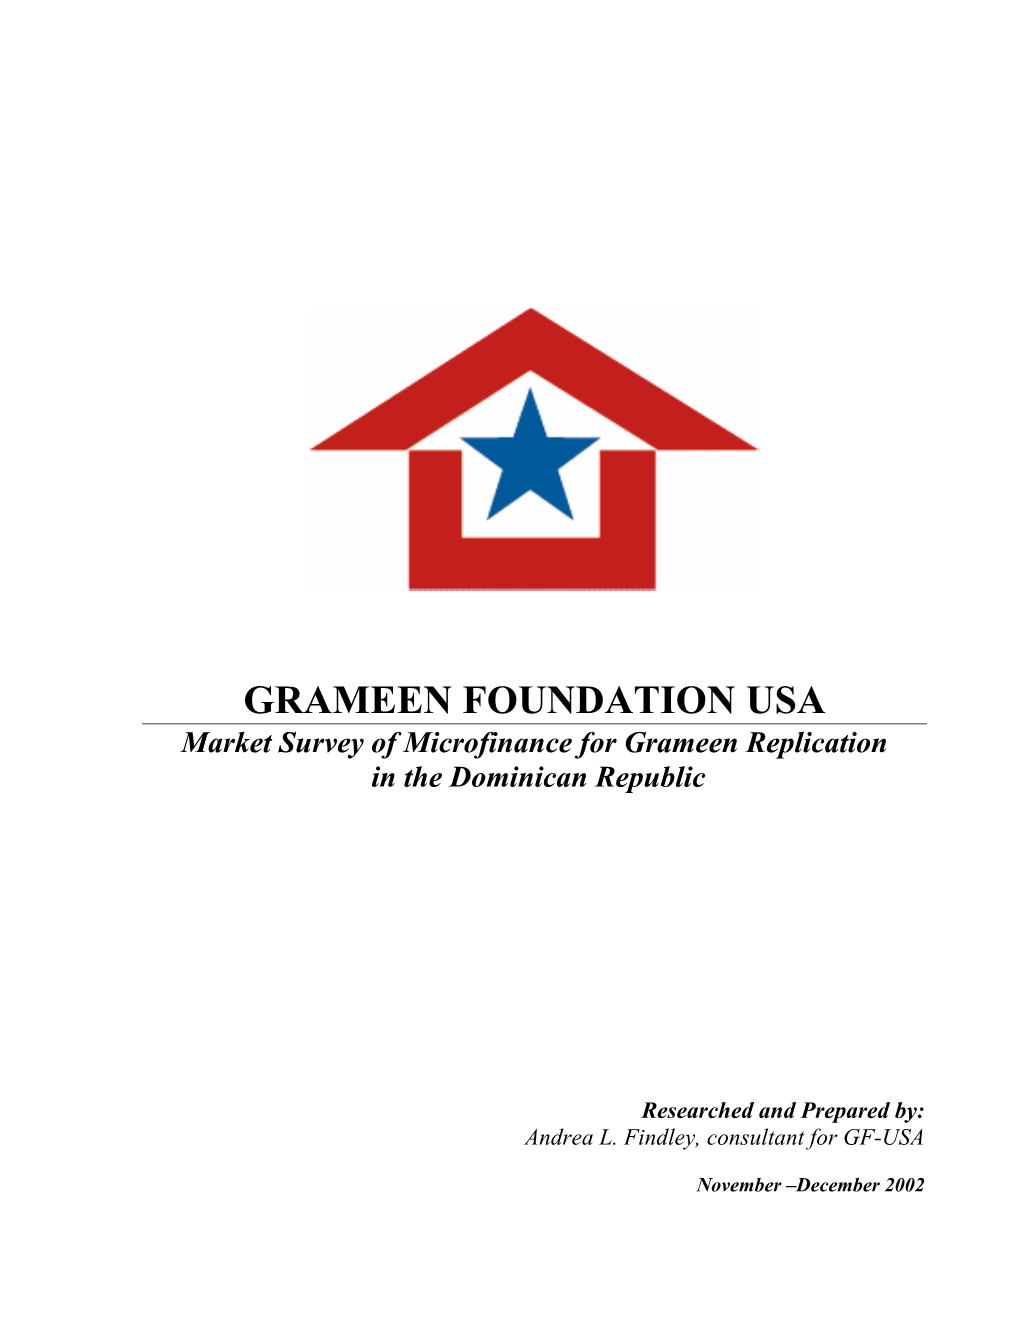 GRAMEEN FOUNDATION USA Market Survey of Microfinance for Grameen Replication in the Dominican Republic